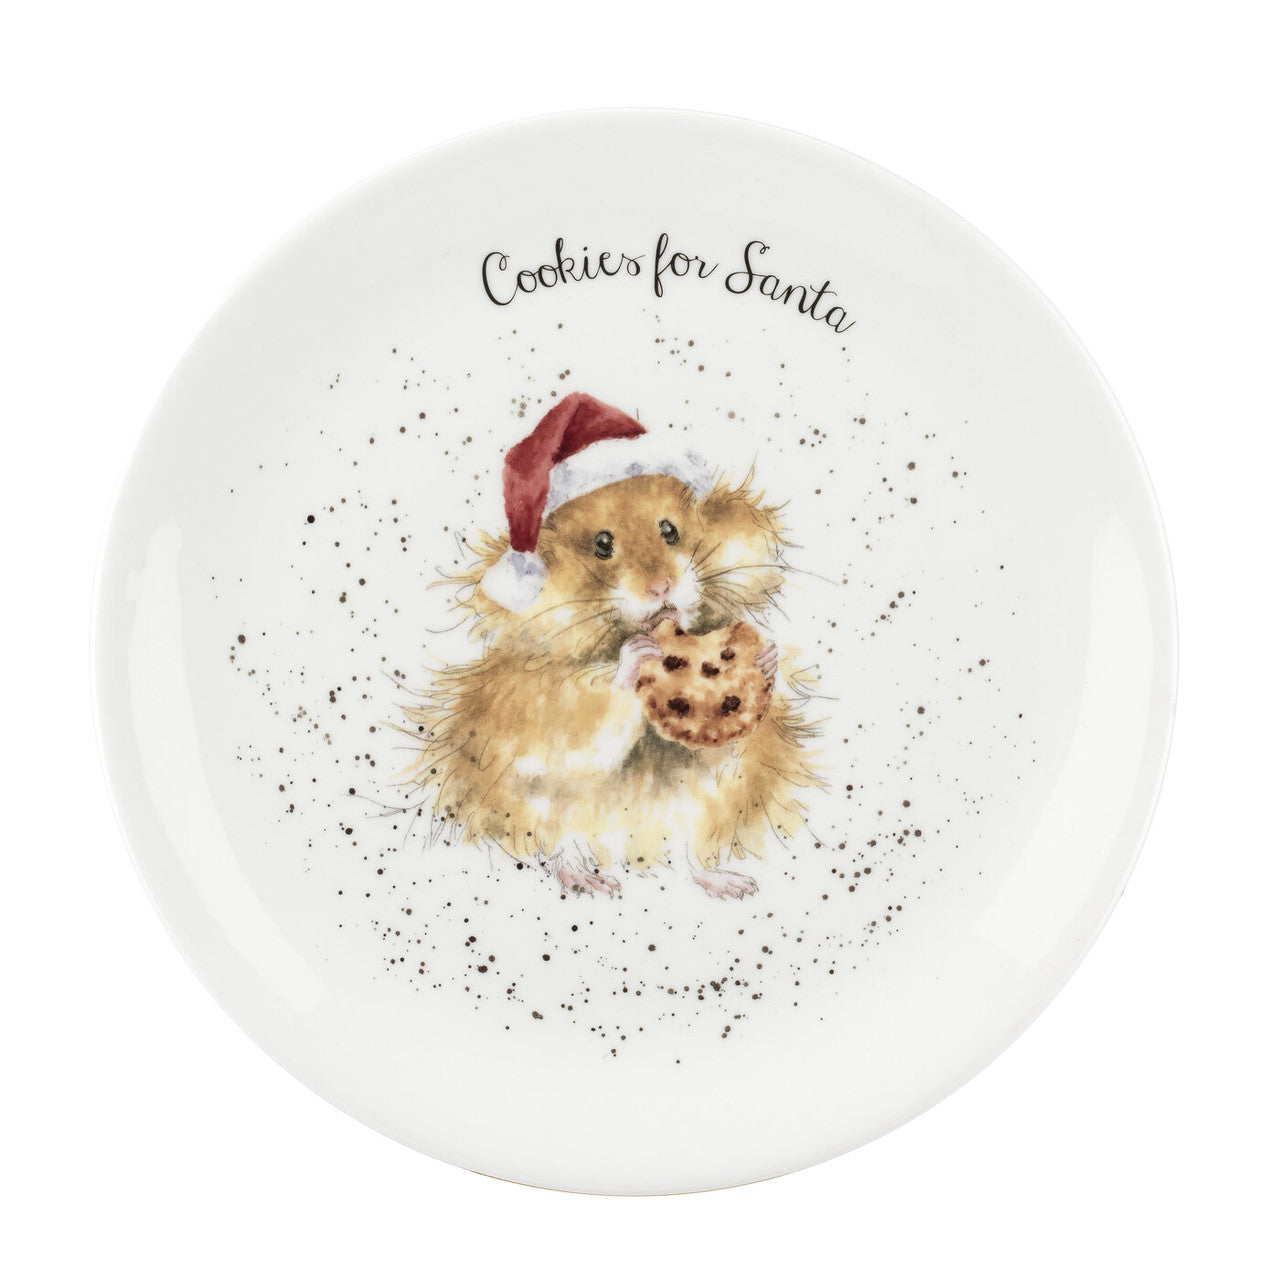 'Cookies for Santa' Bone China Plate from Wrendale Designs and Portmeirion